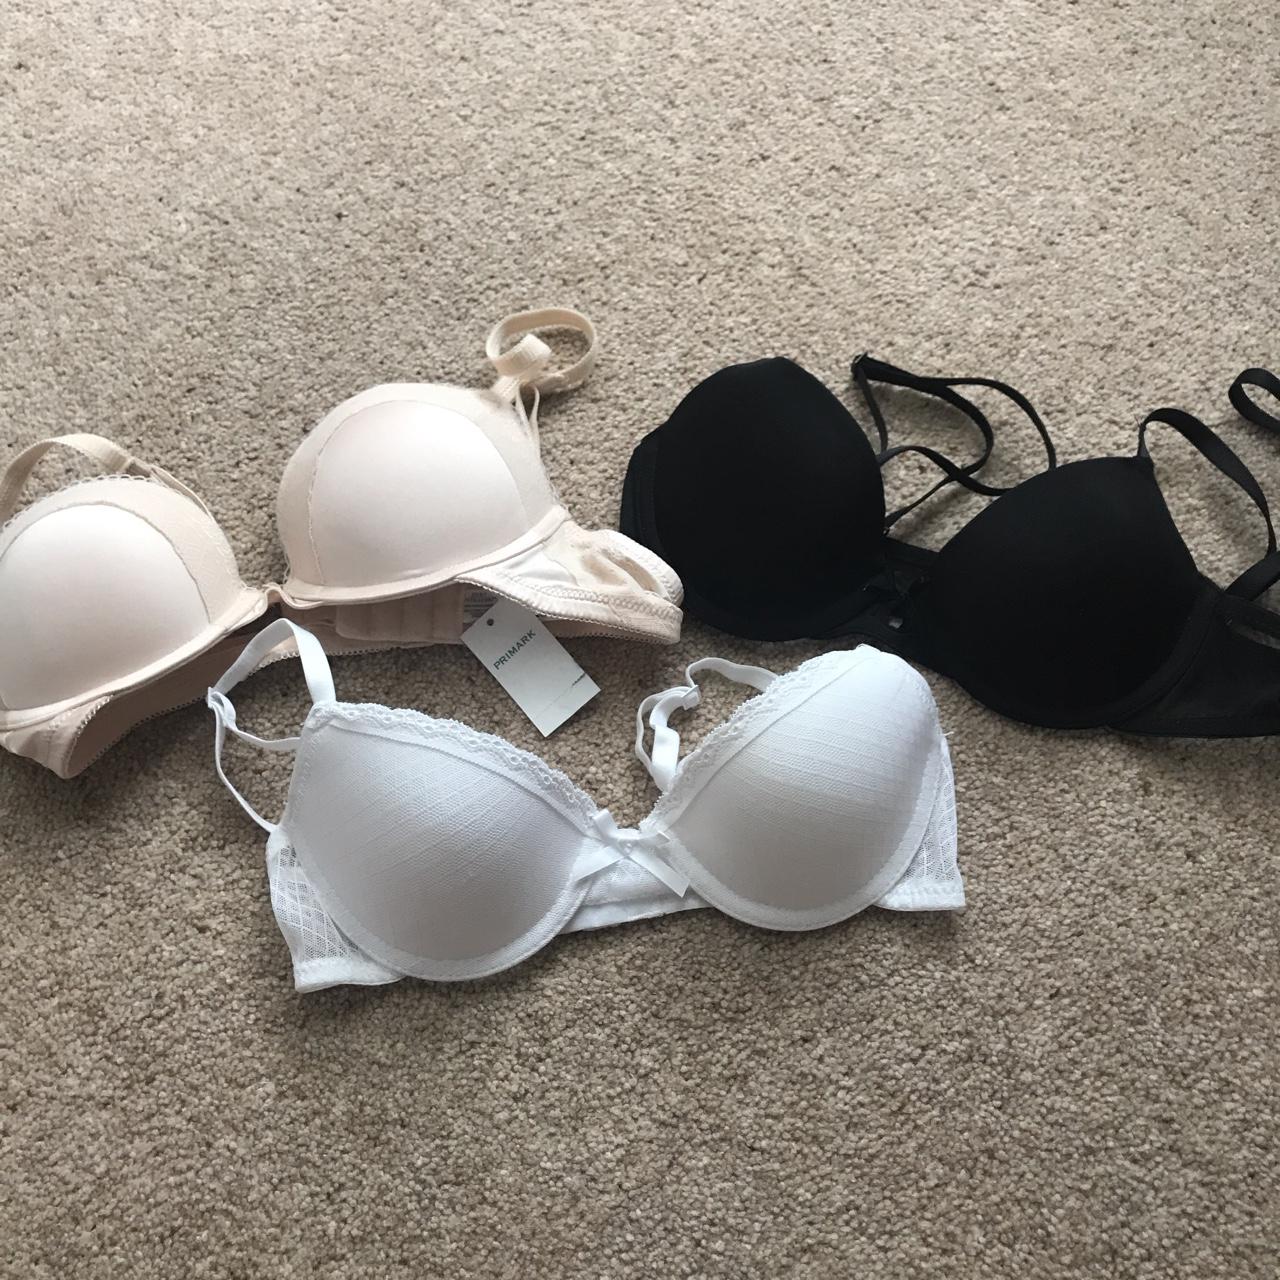 Primark Bras Nude One Brand New With Tags